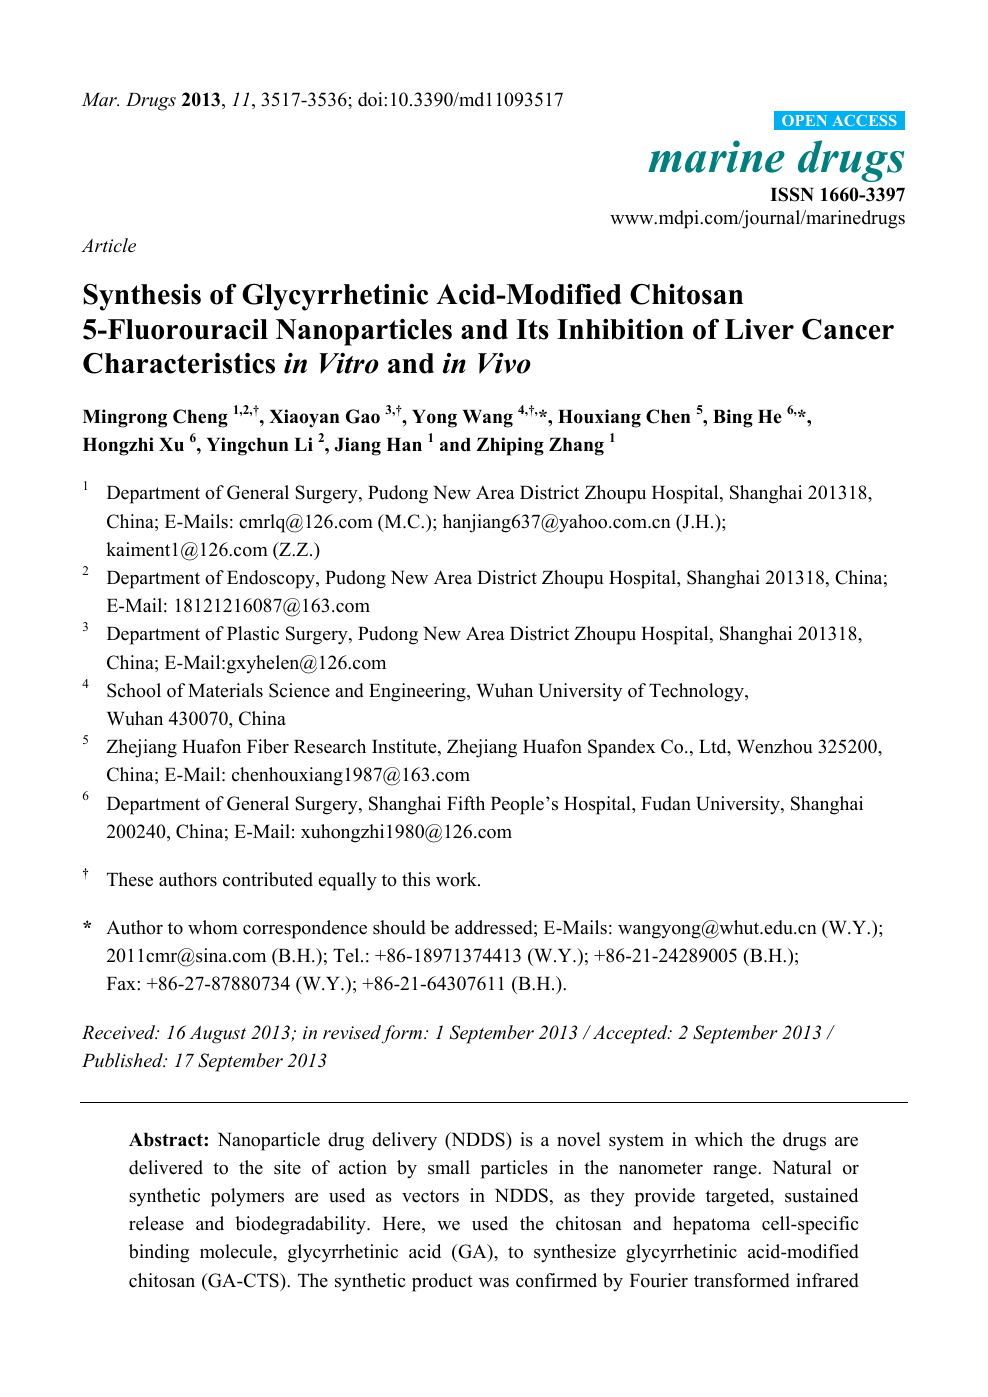 Synthesis Of Glycyrrhetinic Acid Modified Chitosan 5 Fluorouracil Nanoparticles And Its Inhibition Of Liver Cancer Characteristics In Vitro And In Vivo Topic Of Research Paper In Nano Technology Download Scholarly Article Pdf And Read